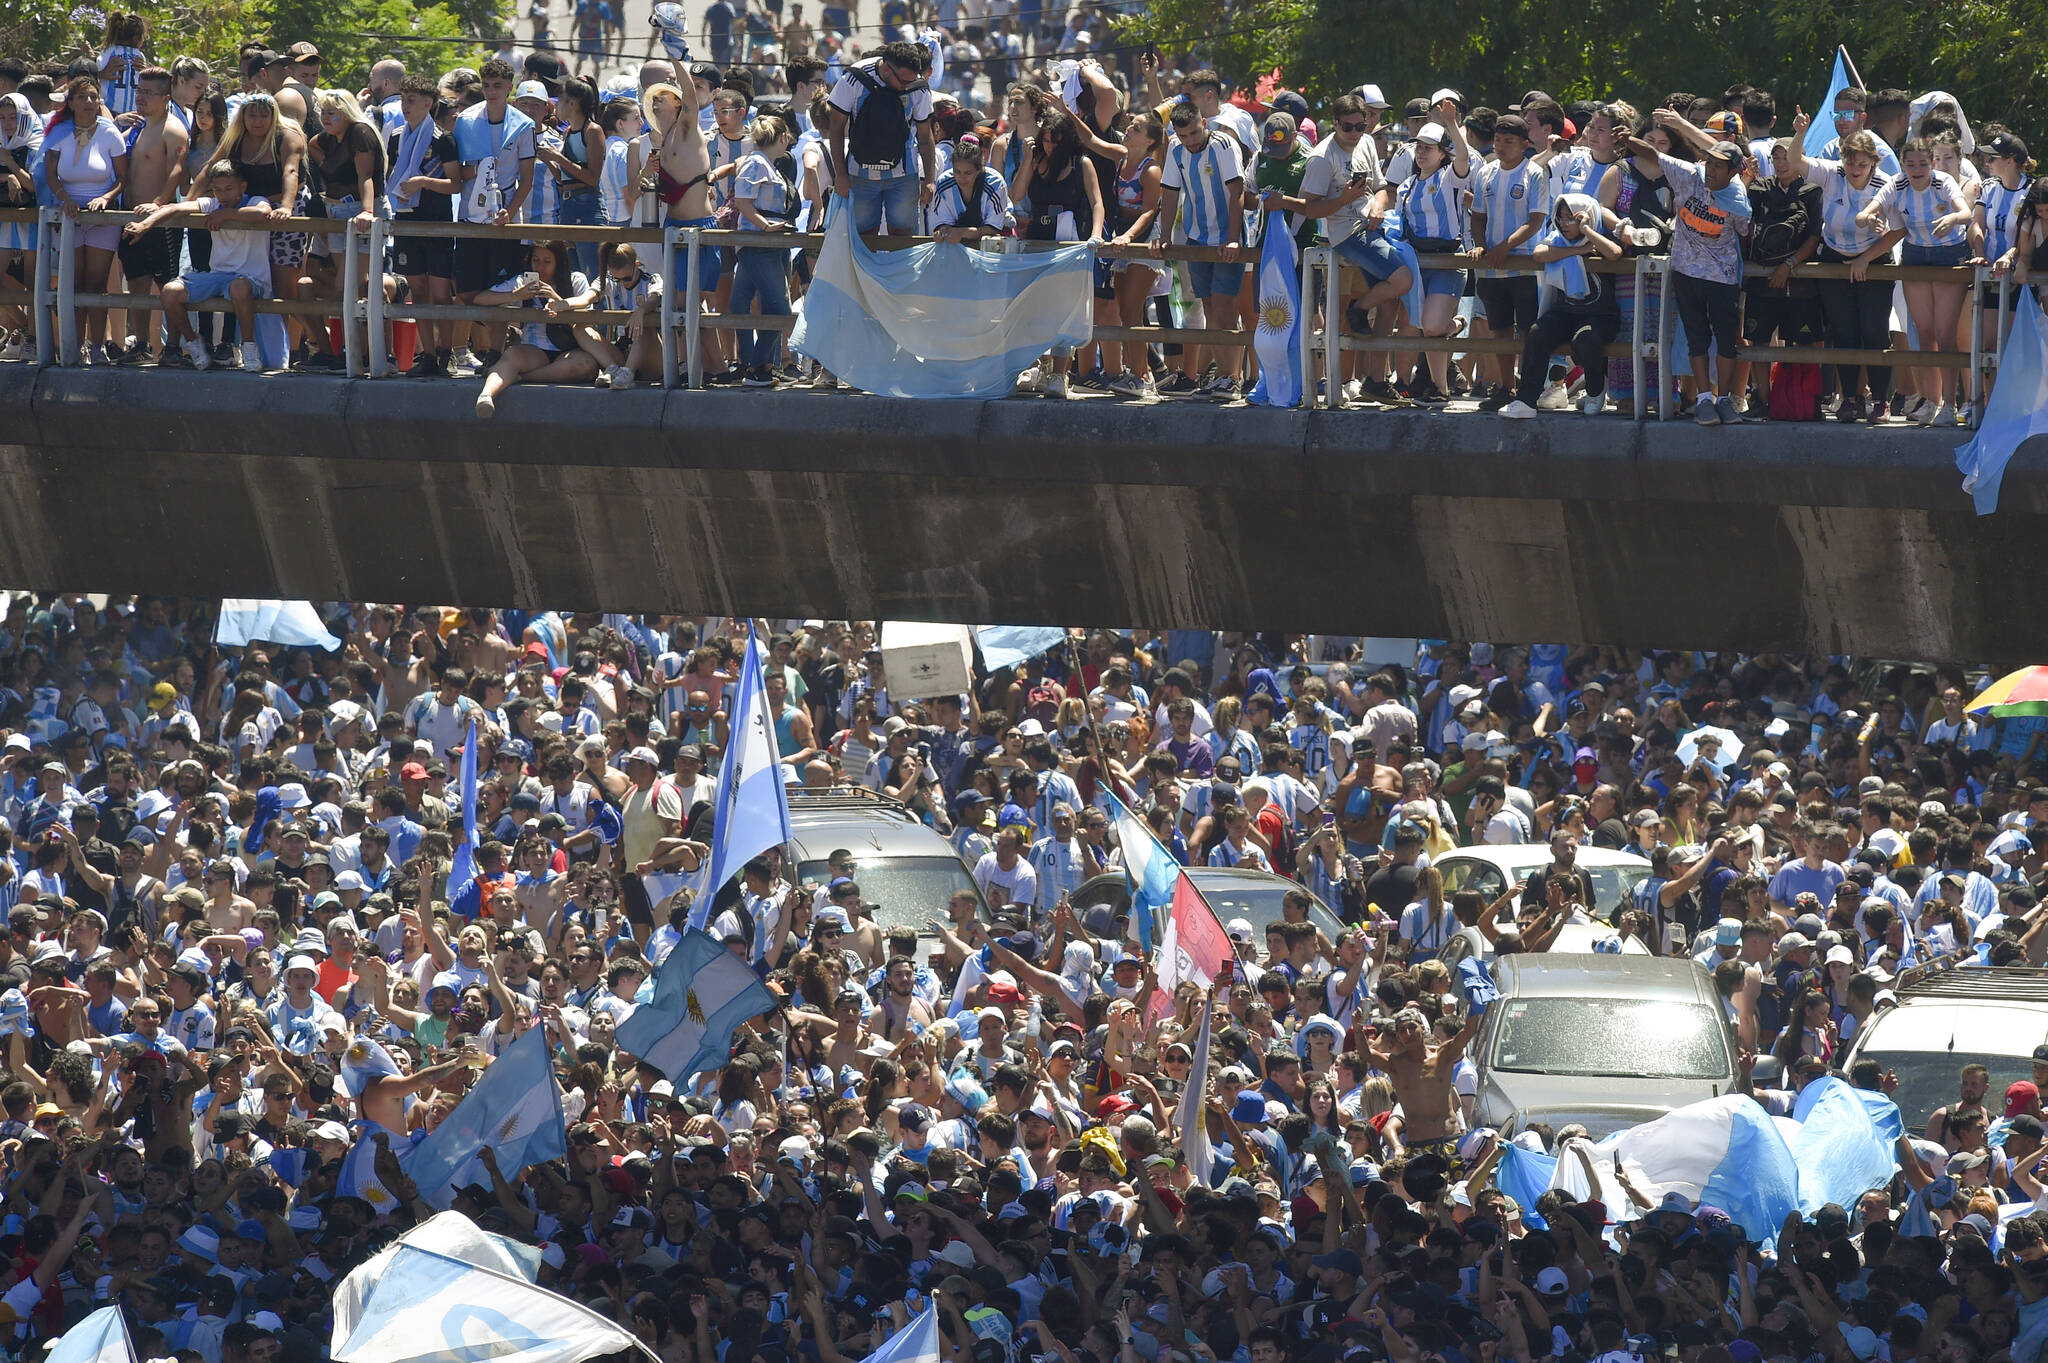 Soccer fans descend on the capital’s downtown for a homecoming parade for the Argentine soccer team that won the World Cup tournament in Buenos Aires, Argentina, Tuesday, Dec. 20, 2022. (AP Photo/Gustavo Garello)